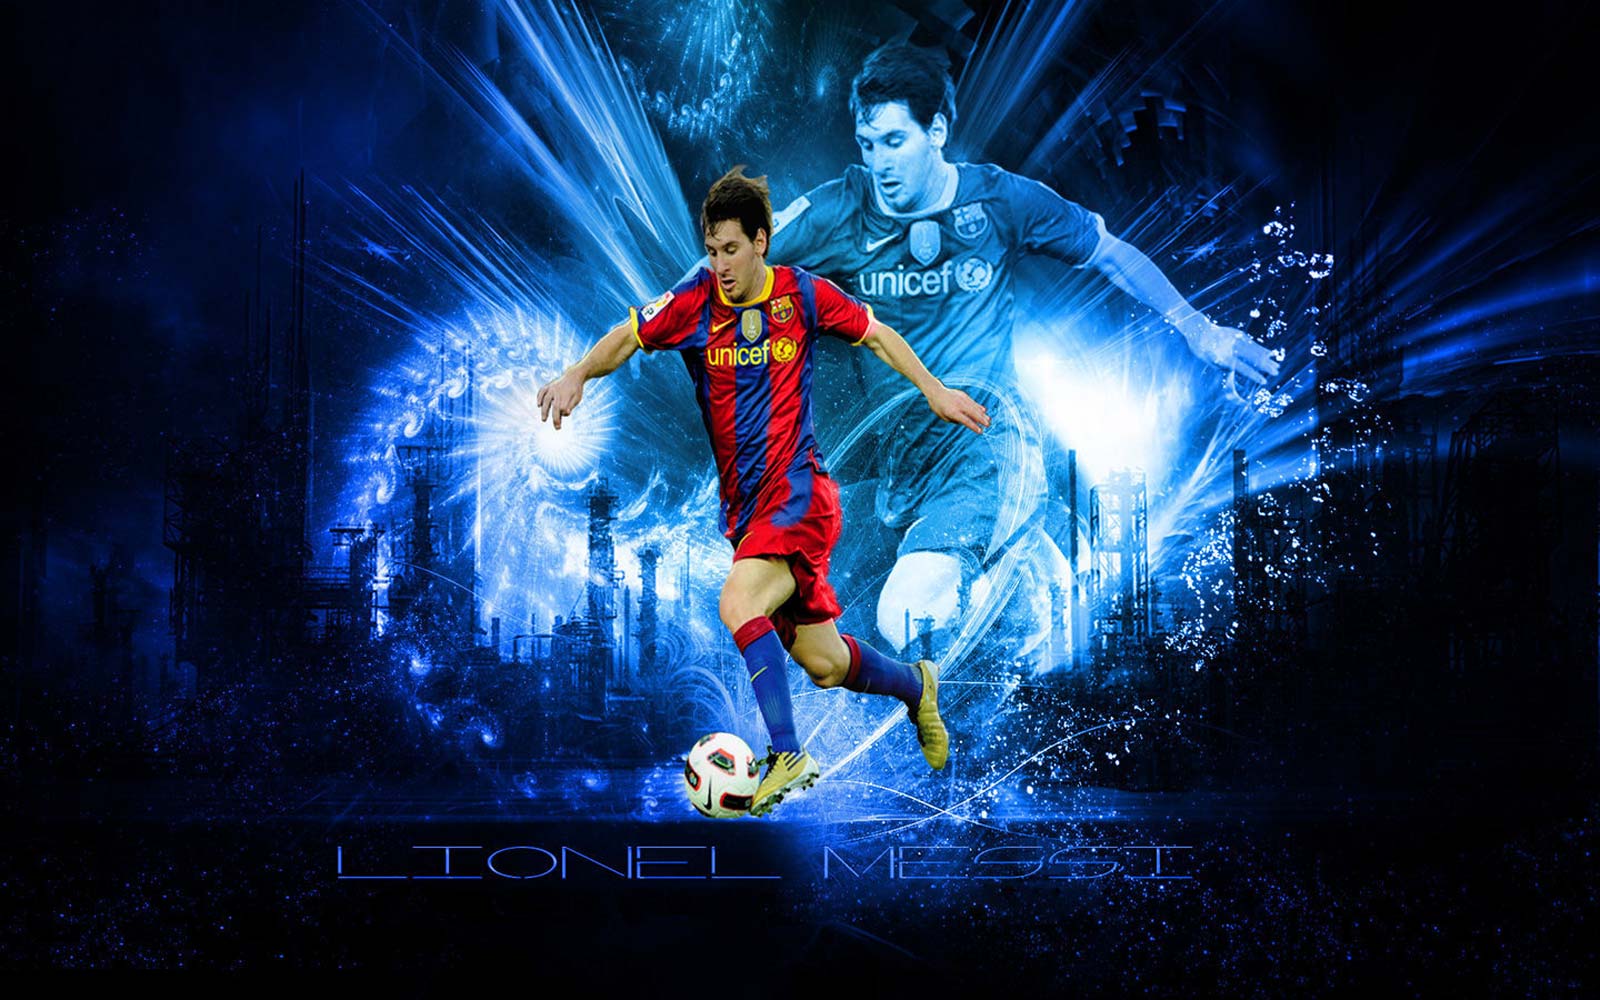 Leo Messi 2013 Wallpaper Hd Images amp Pictures   Becuo